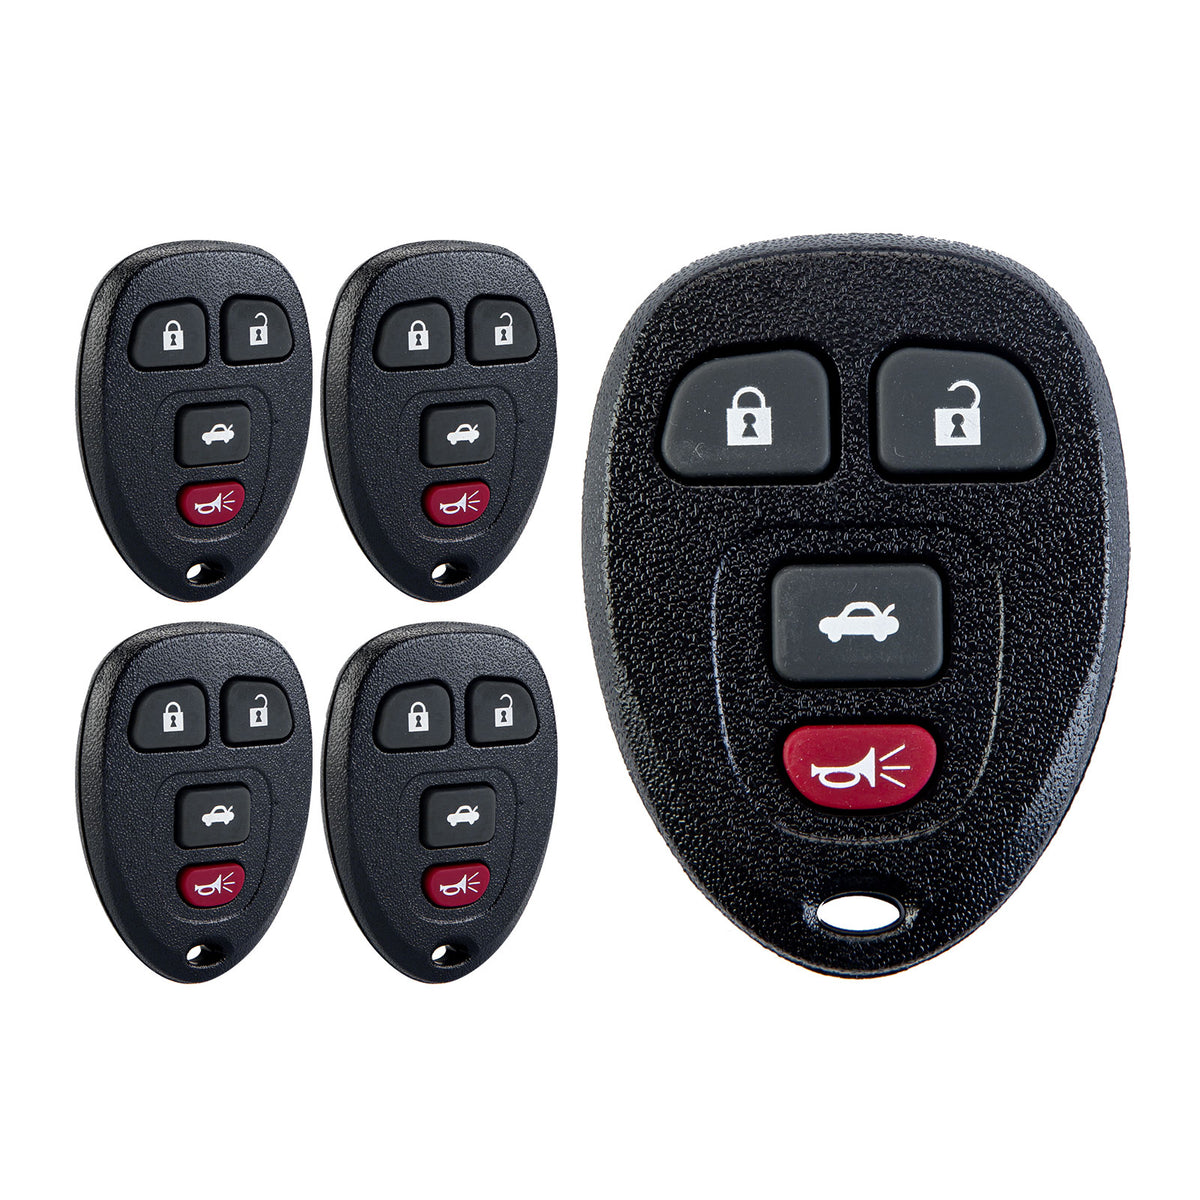 Lots of 5 Car Remote Fob Replacement for KOBGT04A 15252034 fits 2007 2008 2009 2010 Chevy Cobalt 4 Button